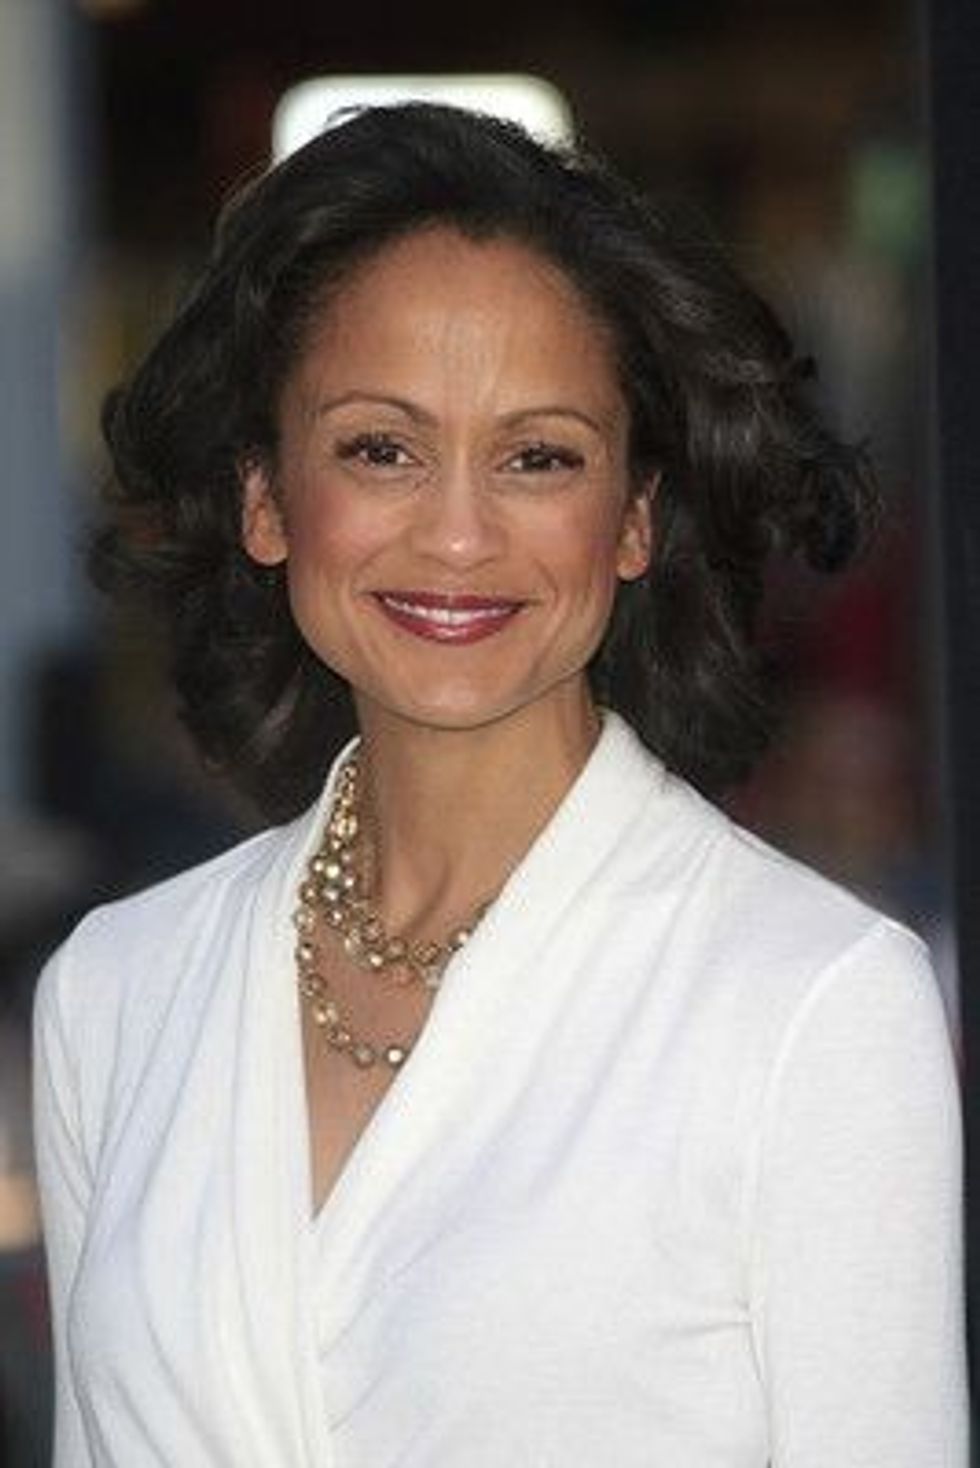 American actress and impressionist Anne Marie Johnson. Learn more about her here at Kidadl